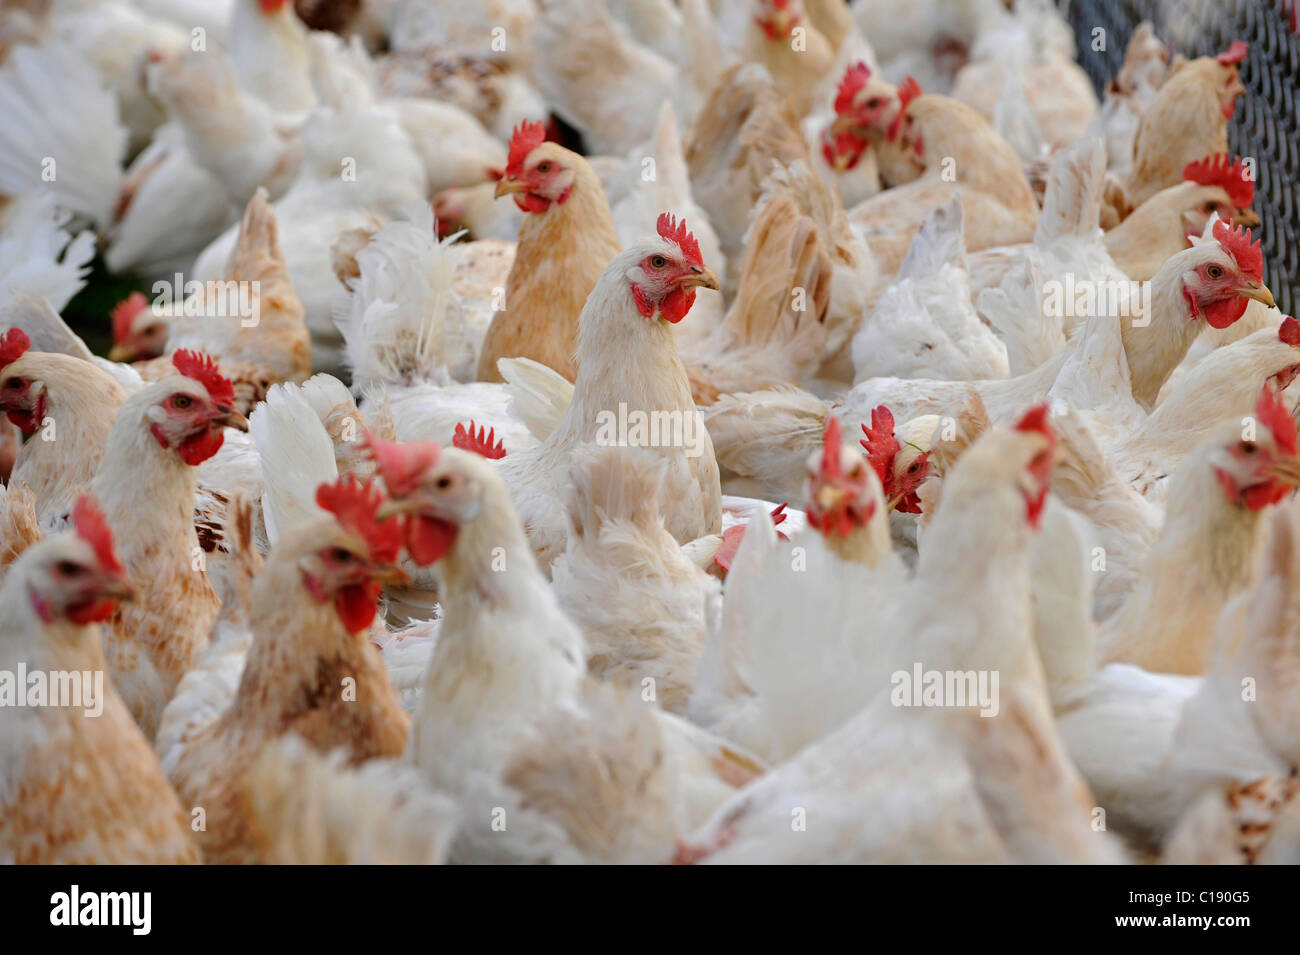 Chickens, poultry, on free-range chicken farm Stock Photo